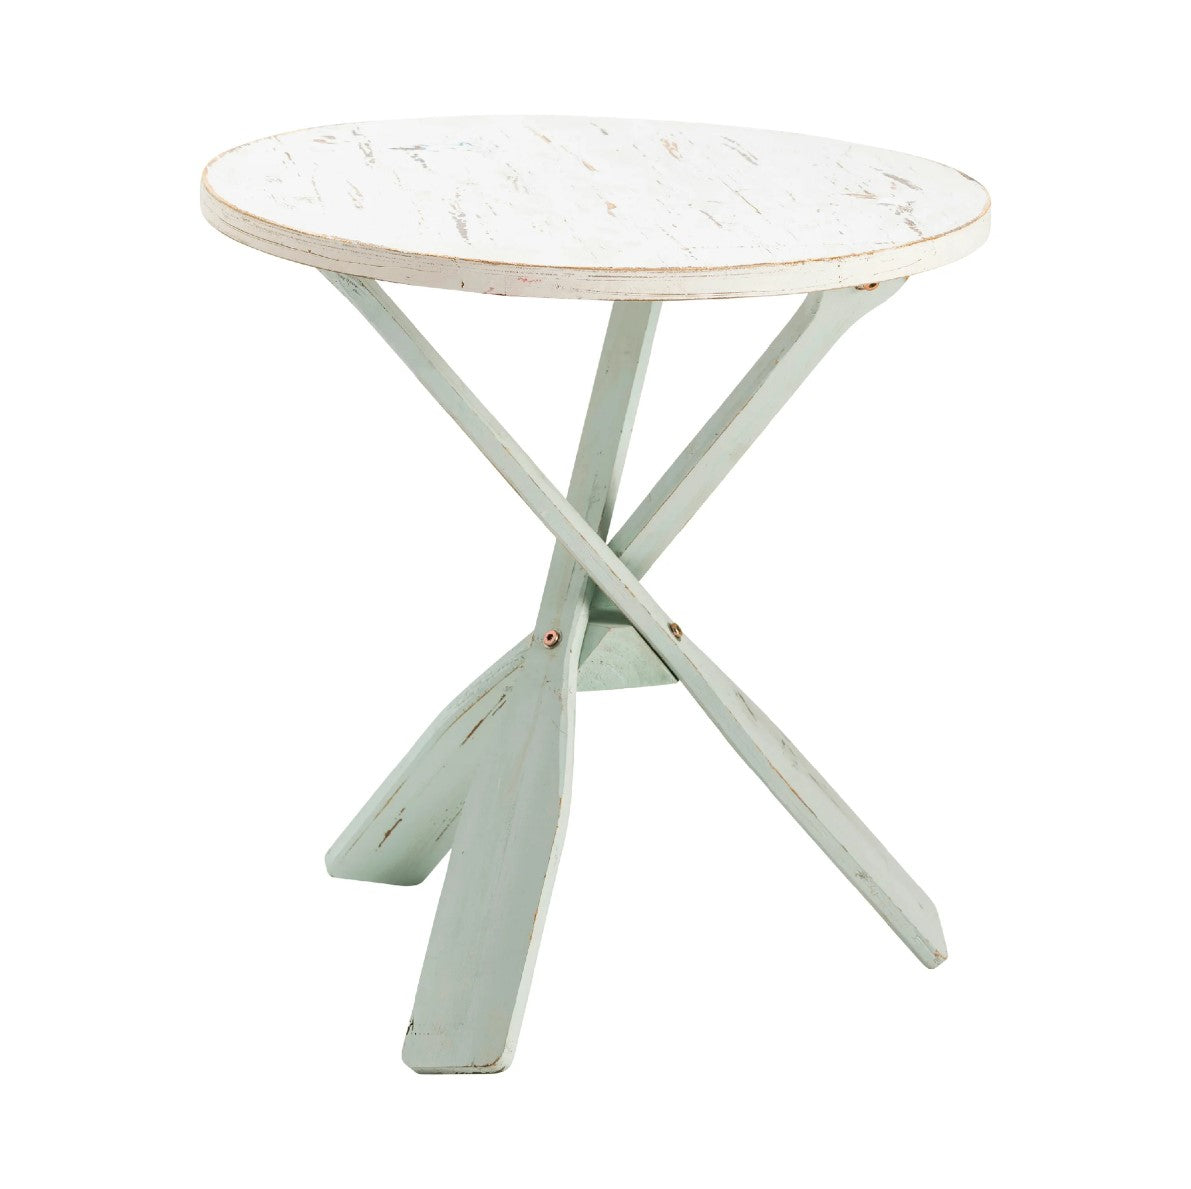 Crestview Collection Chesapeake 24" x 24" x 26" 2-Tone Coastal Wood Paddles Accent Table In Distressed Blue and White Finish